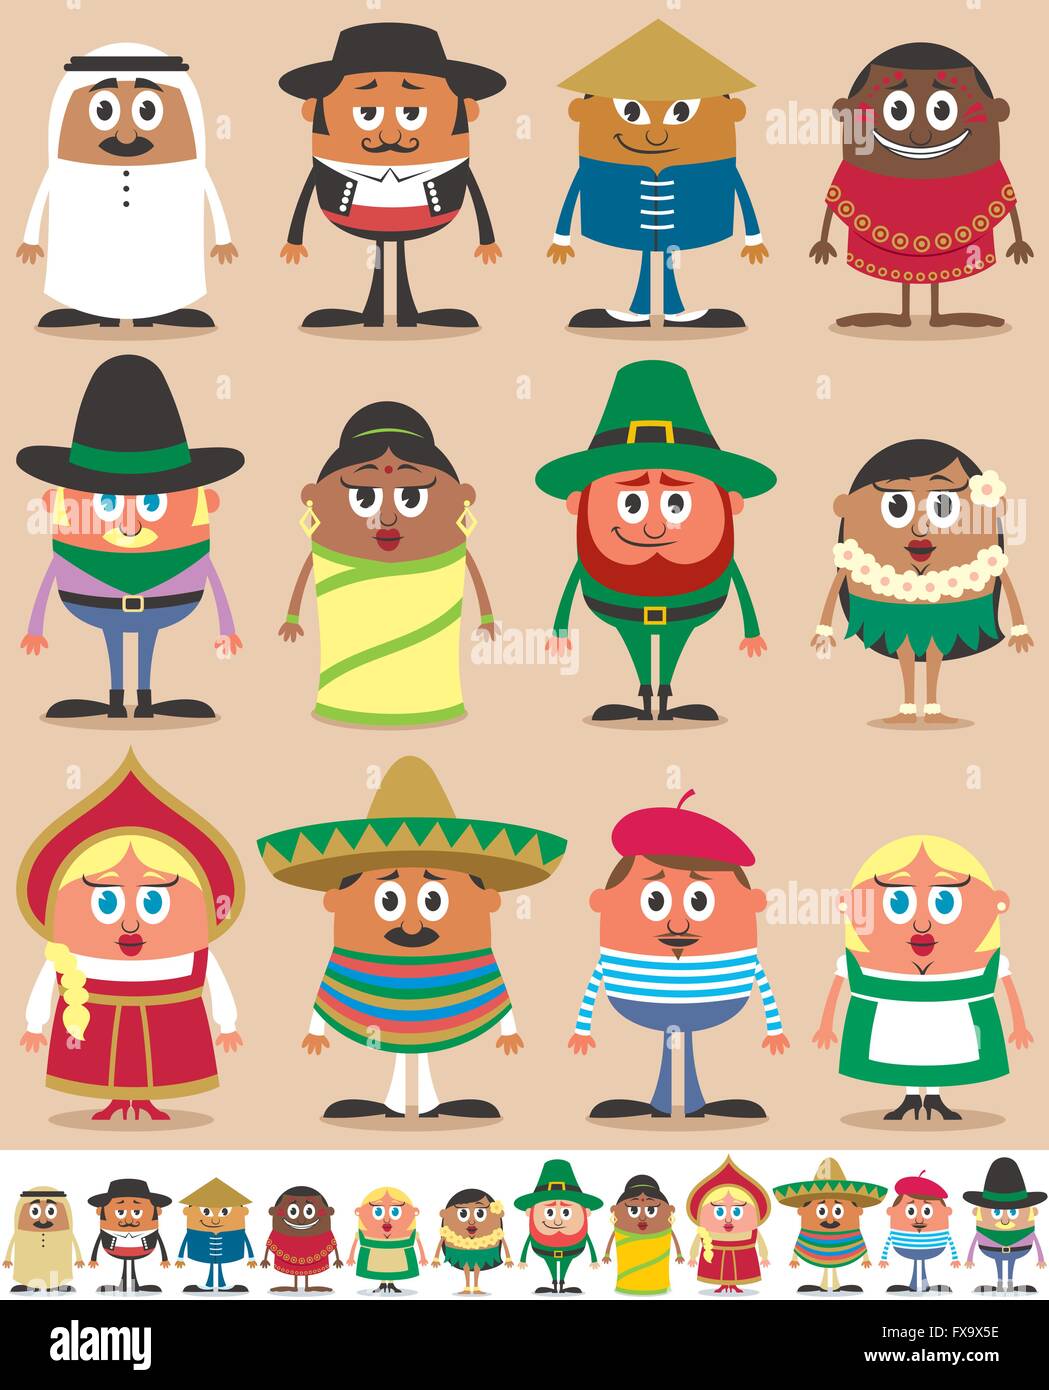 Set of 12 characters dressed in different national costumes. Each character is in 2 color versions depending on the background. Stock Vector